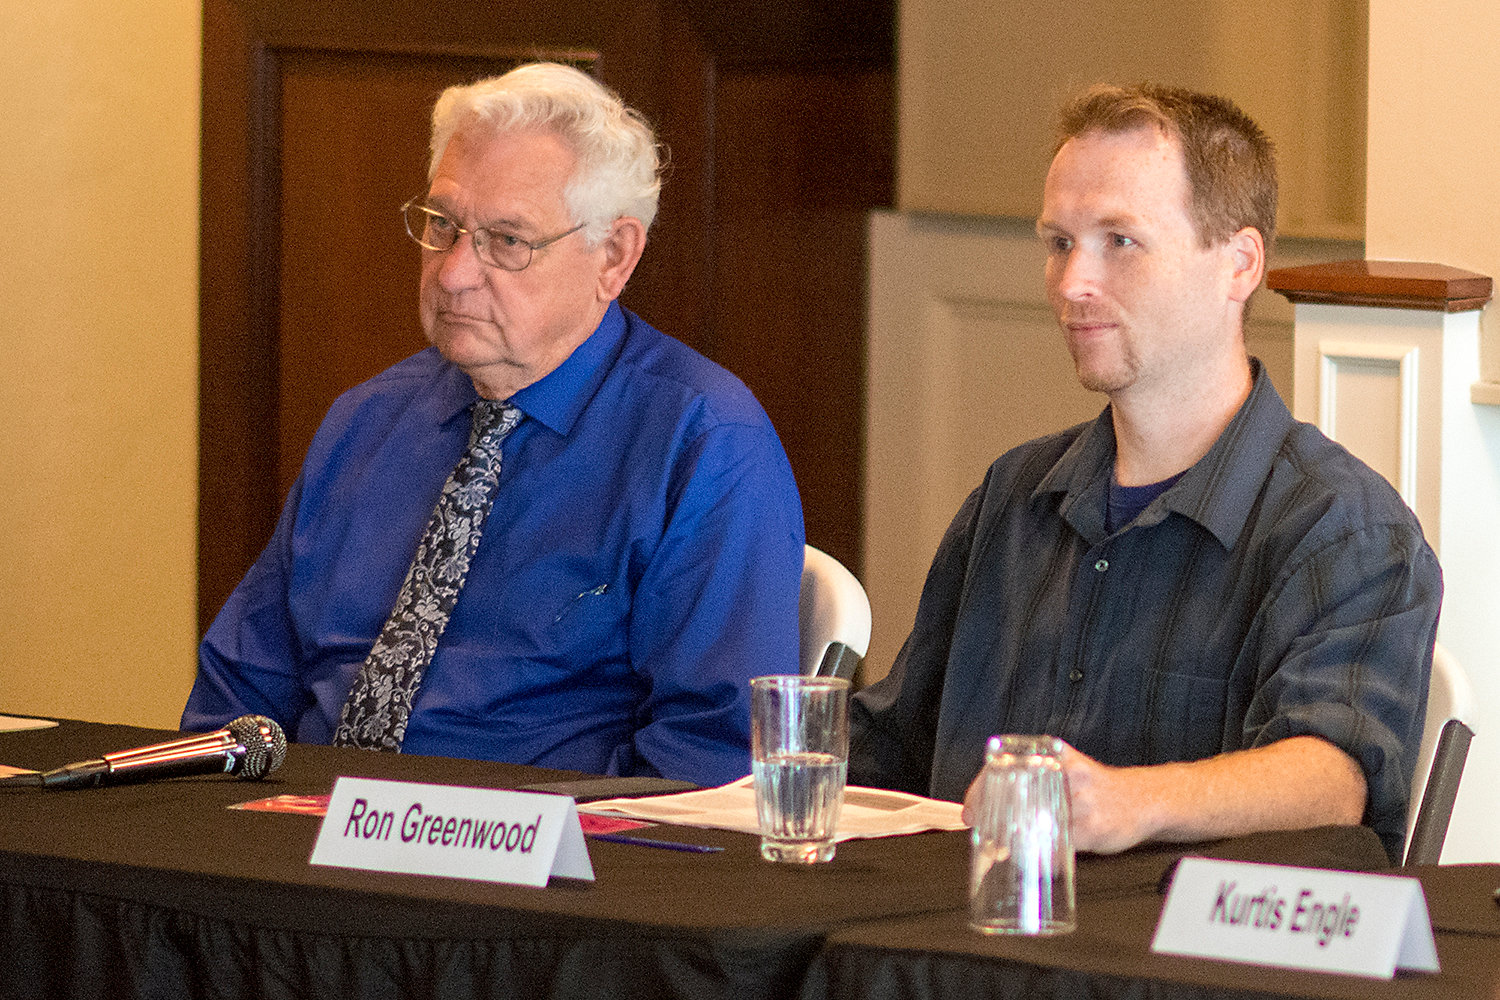 Incument Centralia City Council member Lee Coumbs, who serves as mayor, sits next to fellow candidate Ron Greenwood on Thursday during a debate hosted by the Centralia-Chehalis Chamber of Commerce.